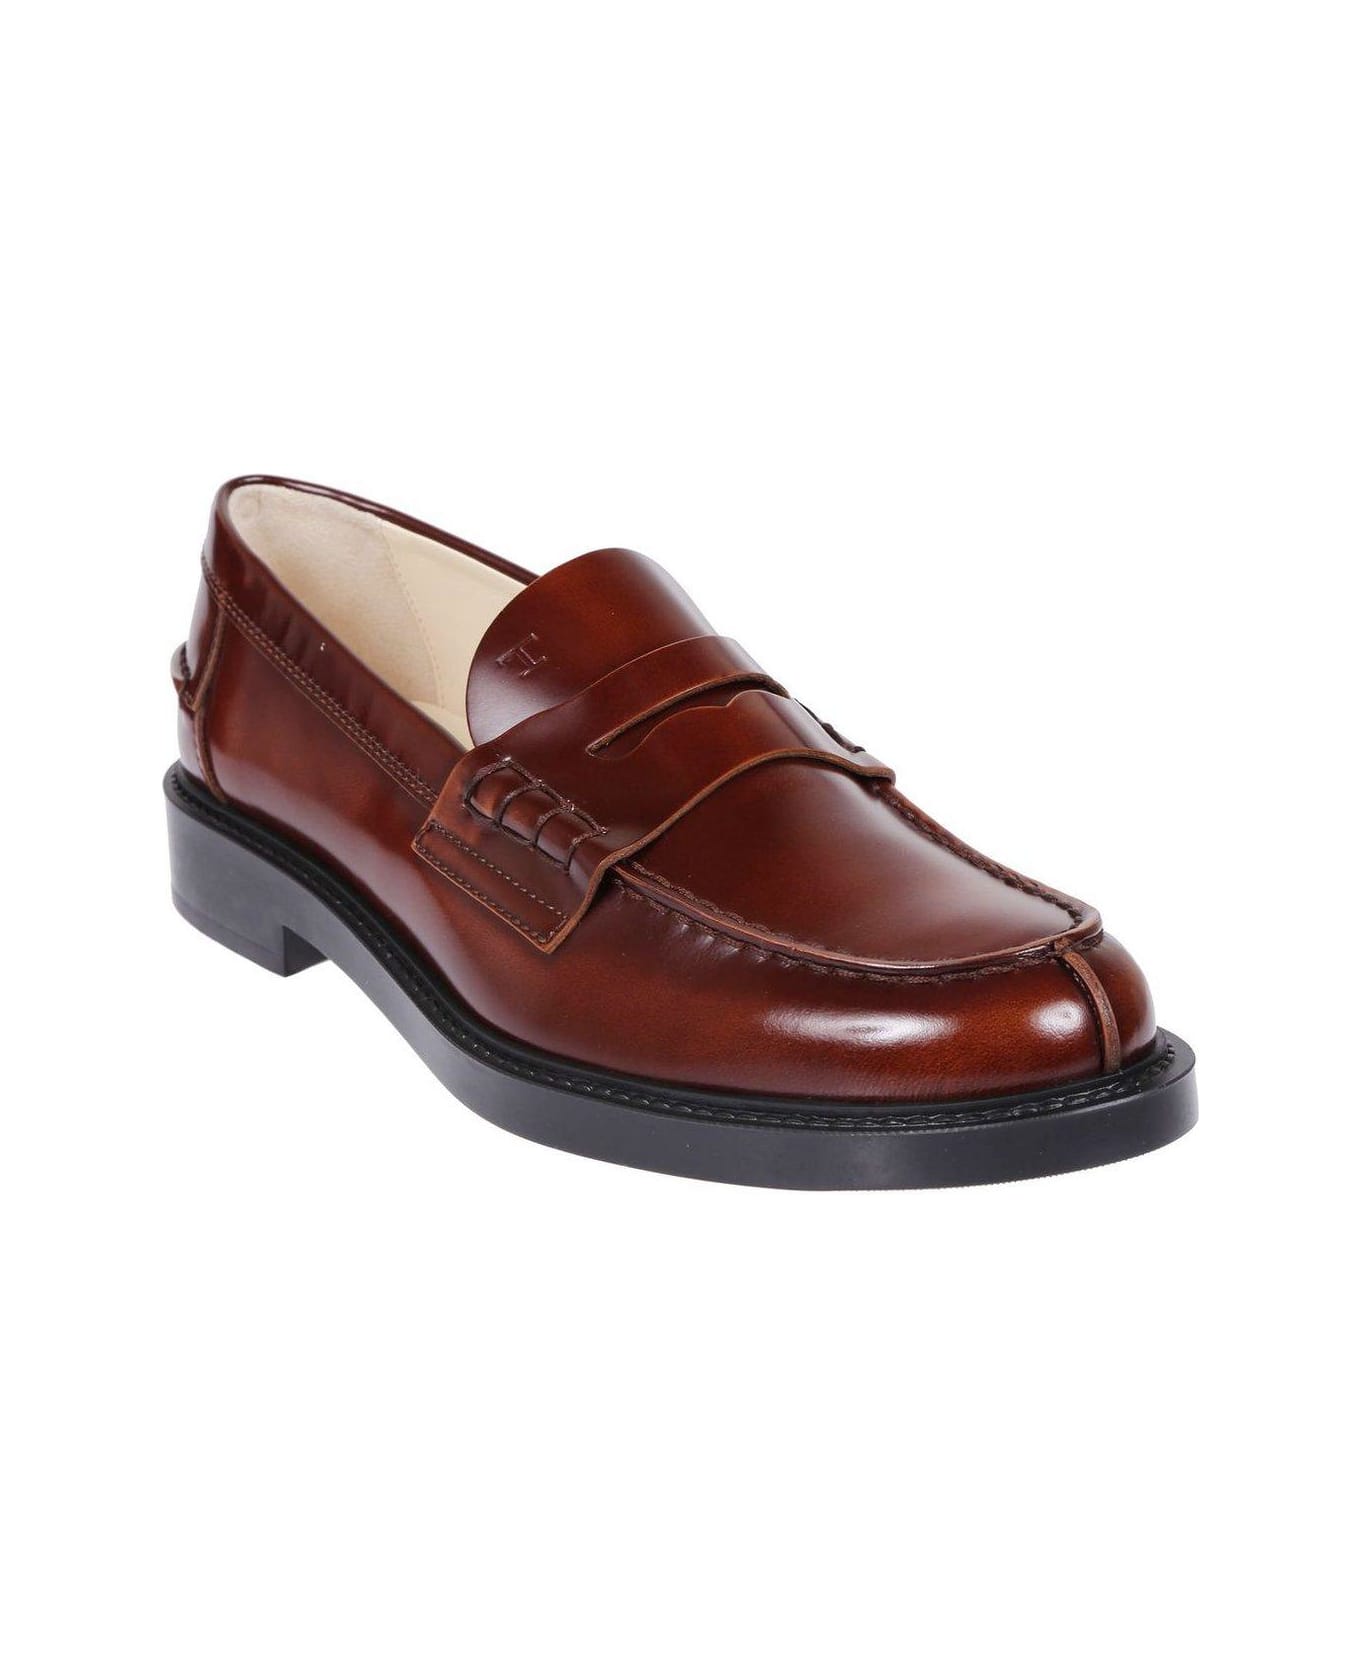 Tod's Penny Bar Loafers - Cuoio フラットシューズ